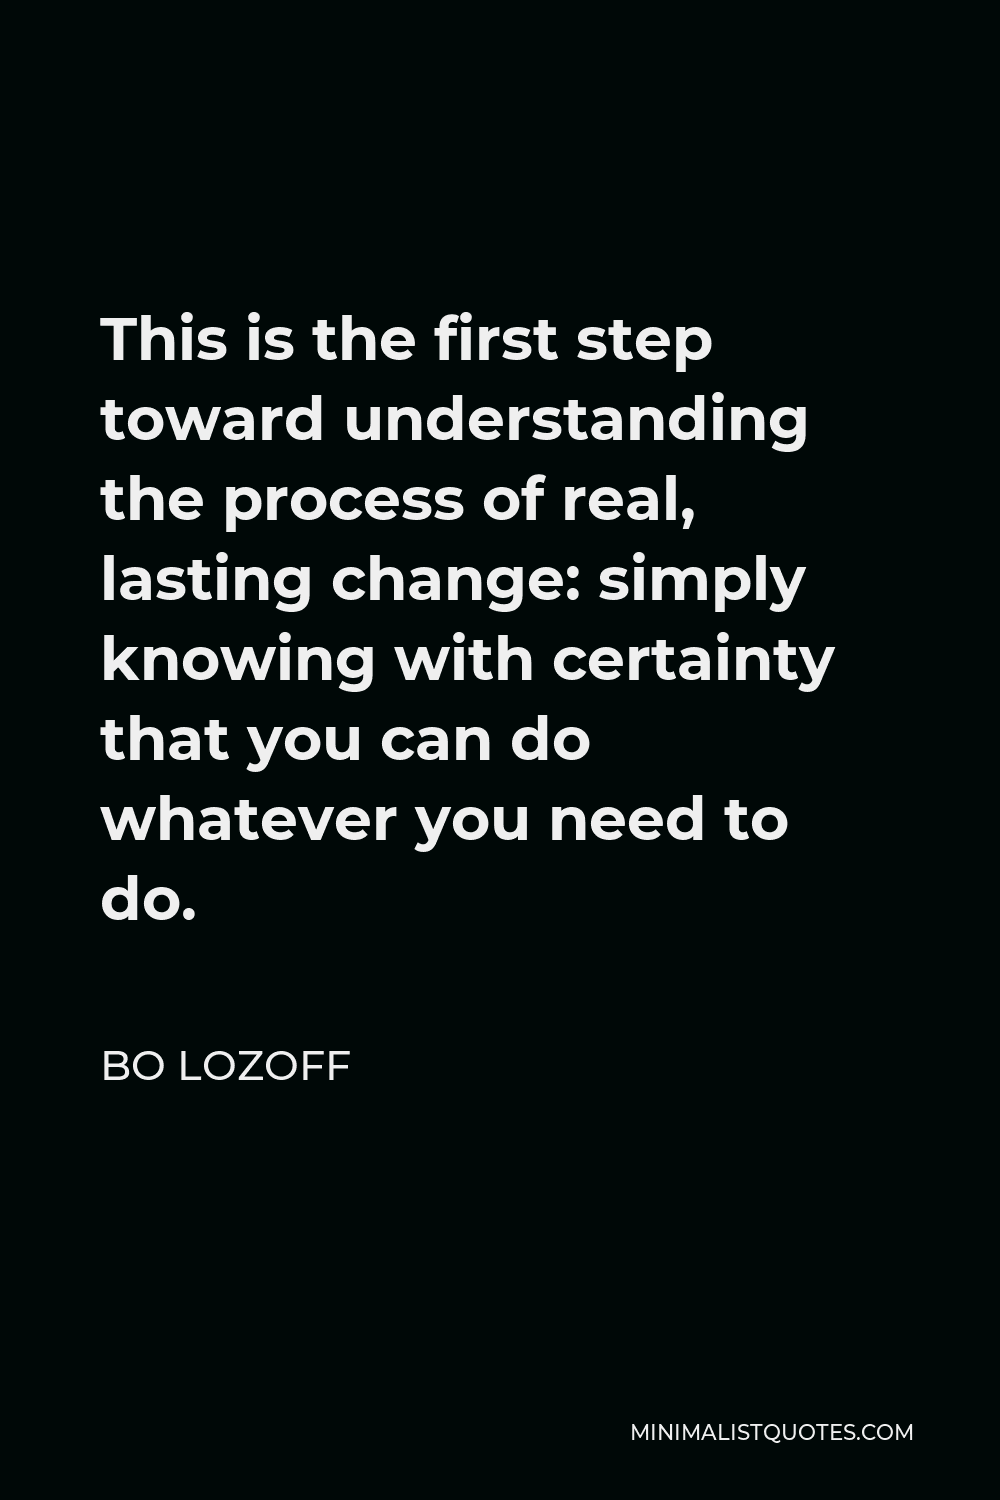 Bo Lozoff Quote - This is the first step toward understanding the process of real, lasting change: simply knowing with certainty that you can do whatever you need to do.